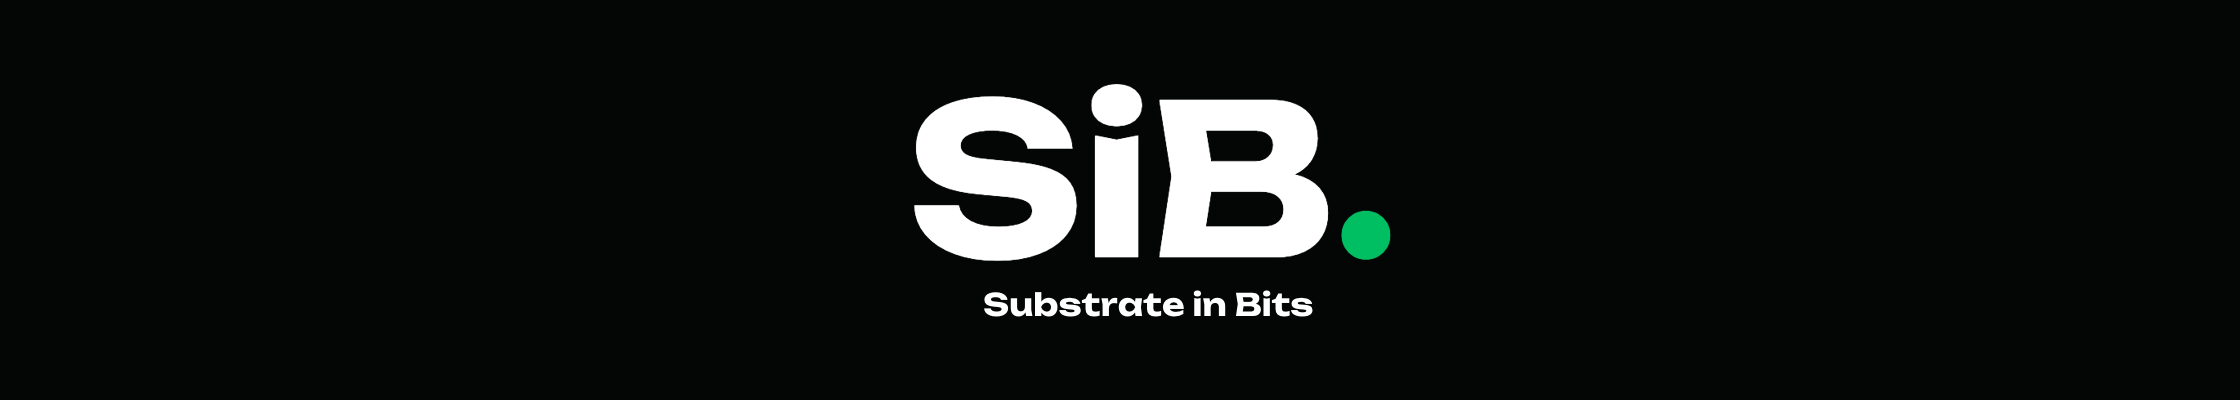 Substrate in Bits